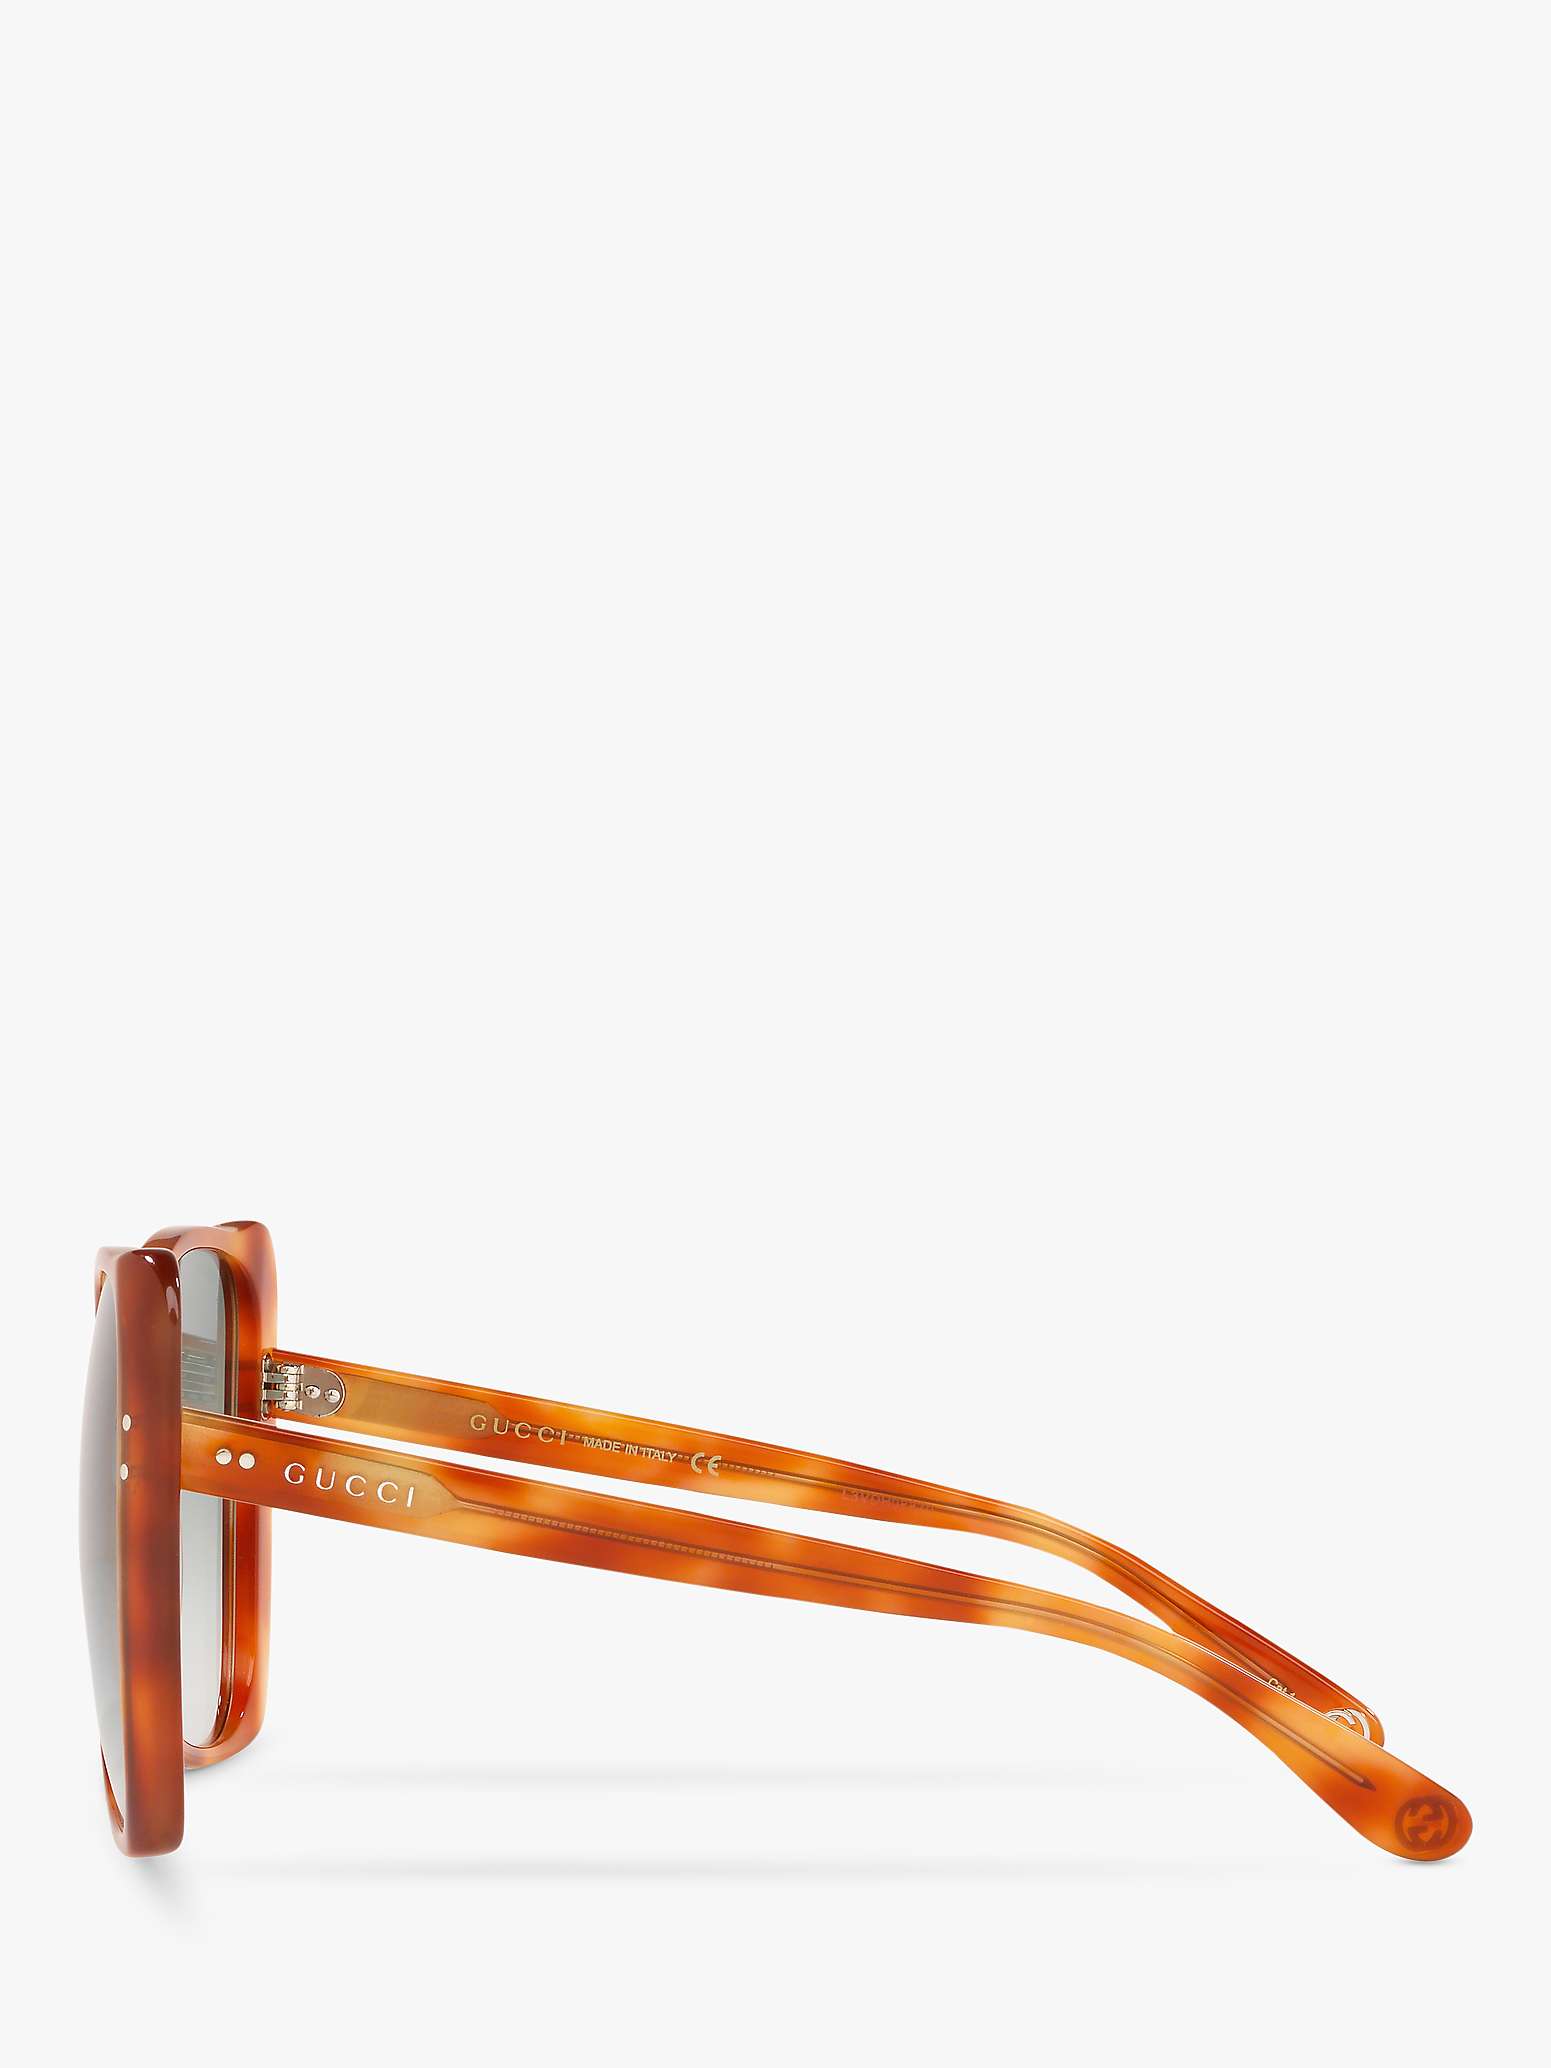 Buy Gucci GG0471S Women's Butterfly Sunglasses Online at johnlewis.com